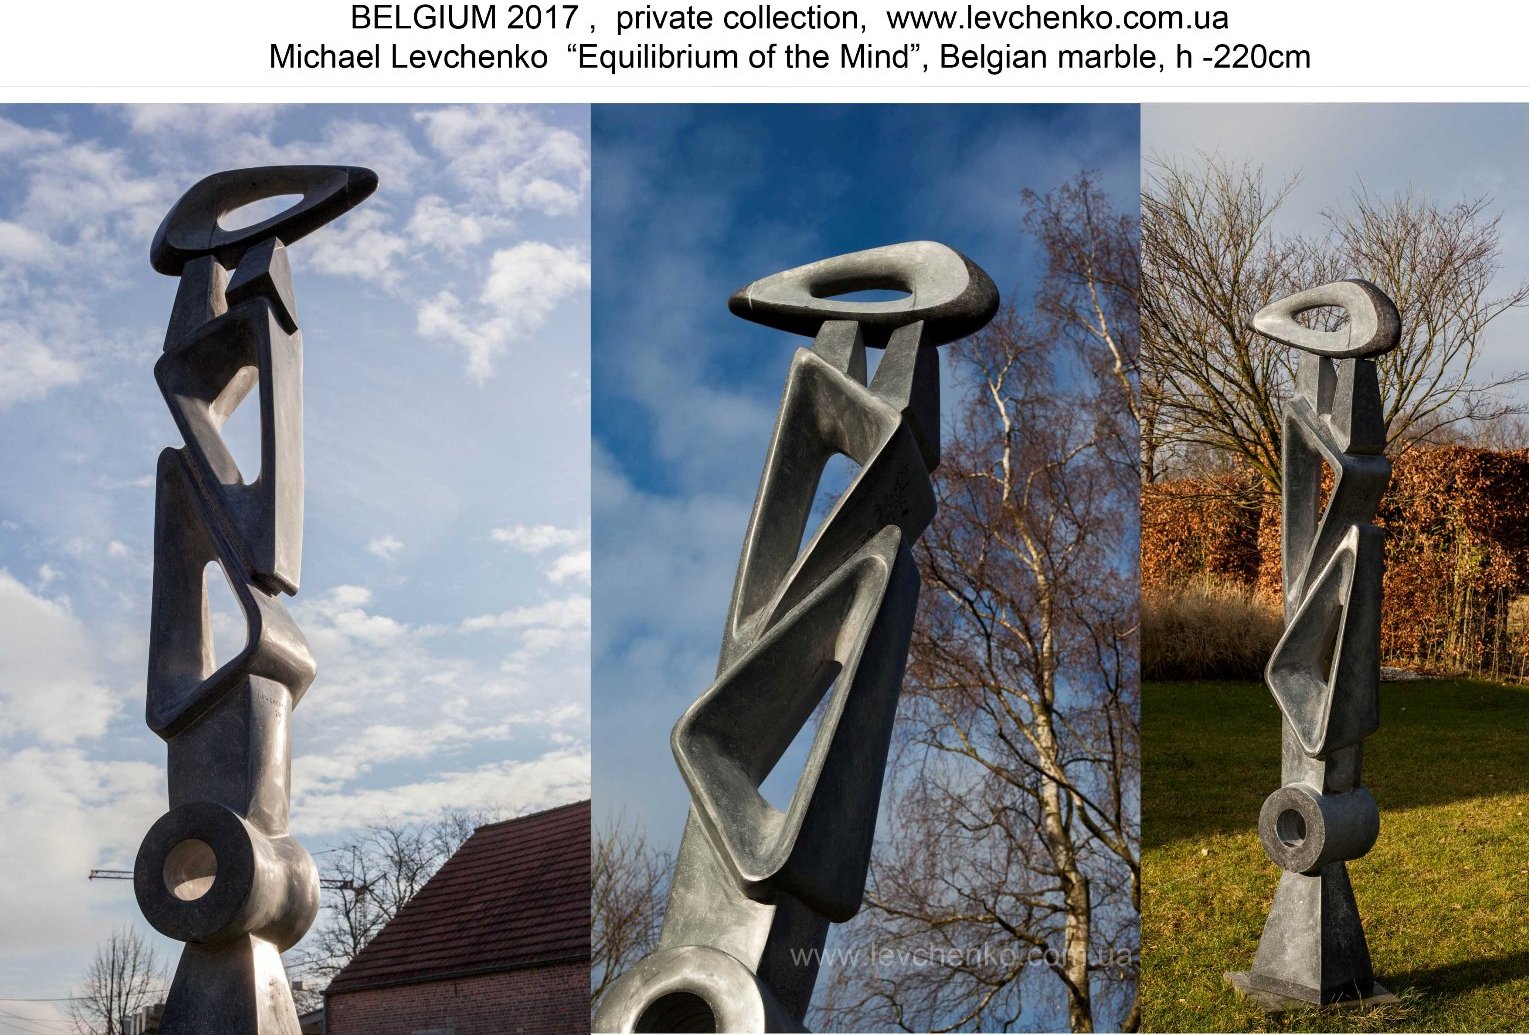 Michael Levchenko – A Talented Abstract Sculptor from Ukraine